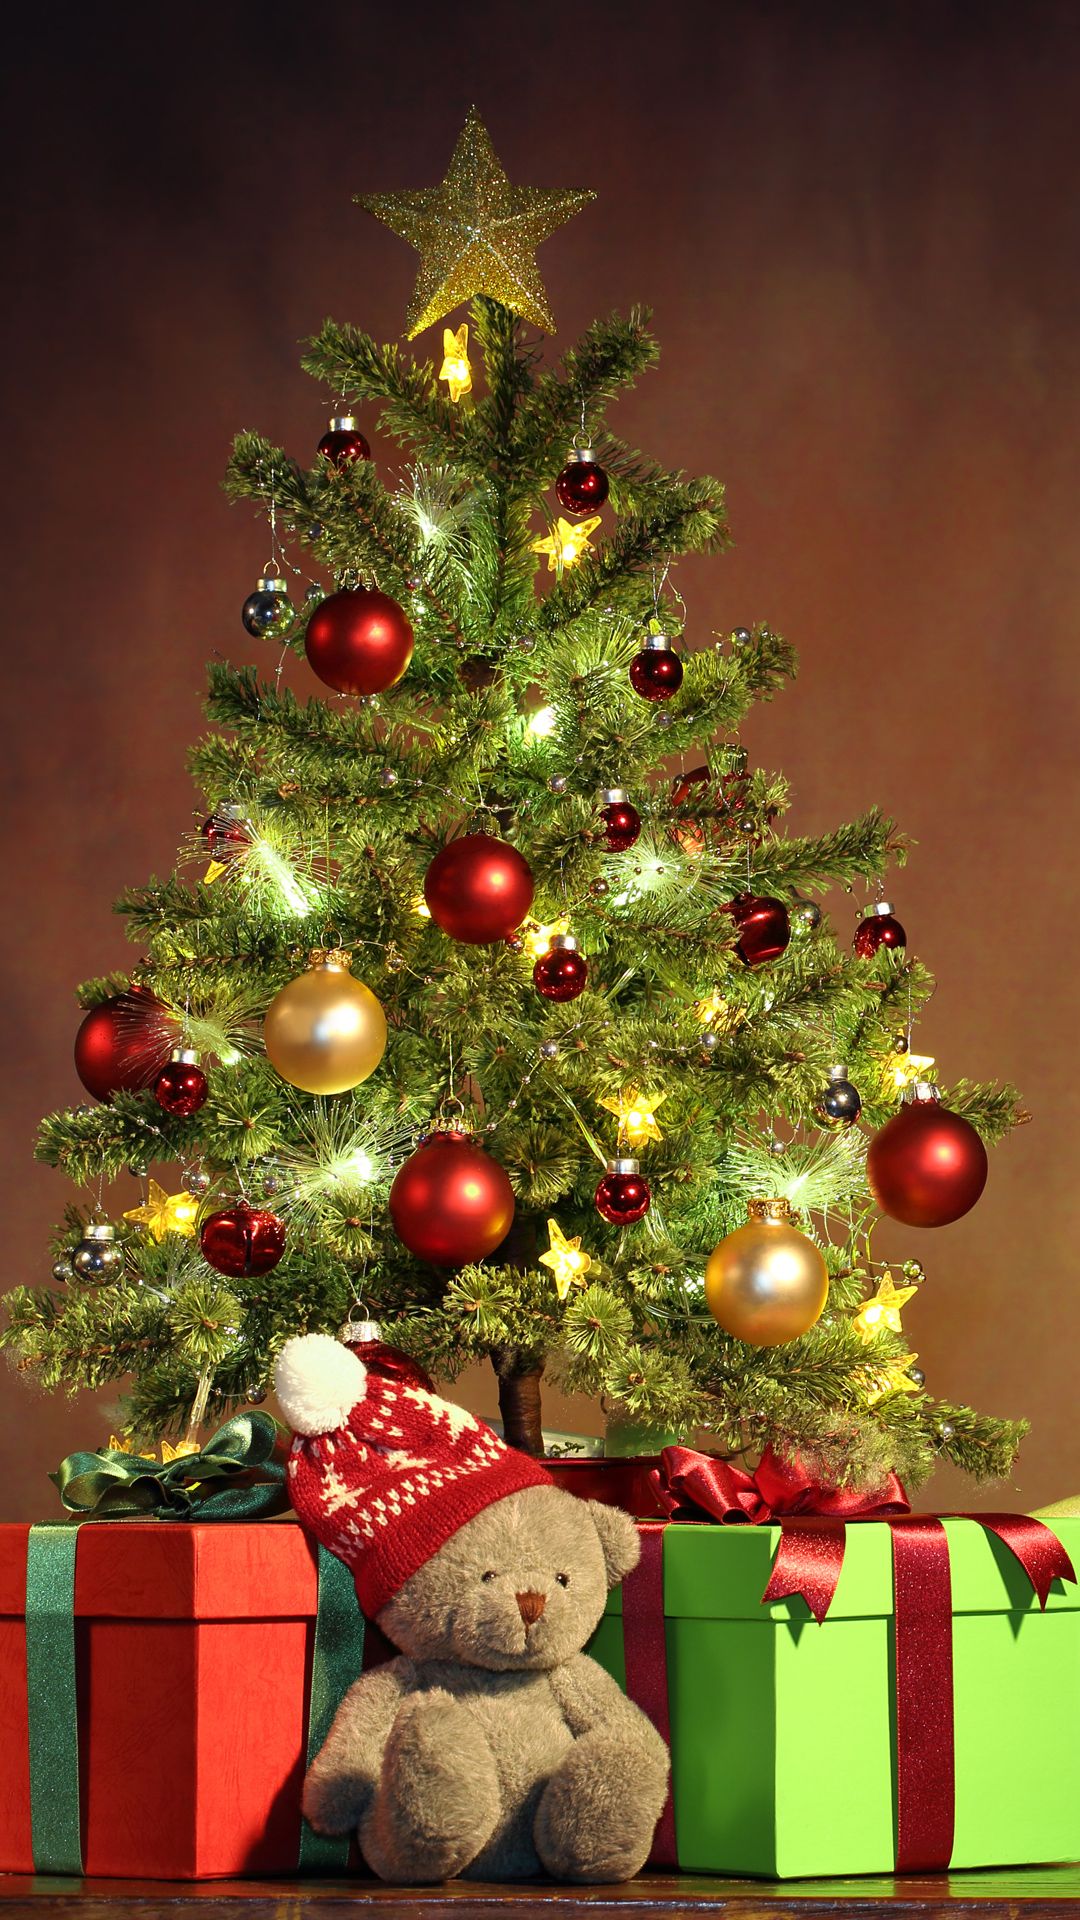 Christmas Tree IPhone 6S Plus Wallpaper Quality Image And Transparent PNG Free Clipart